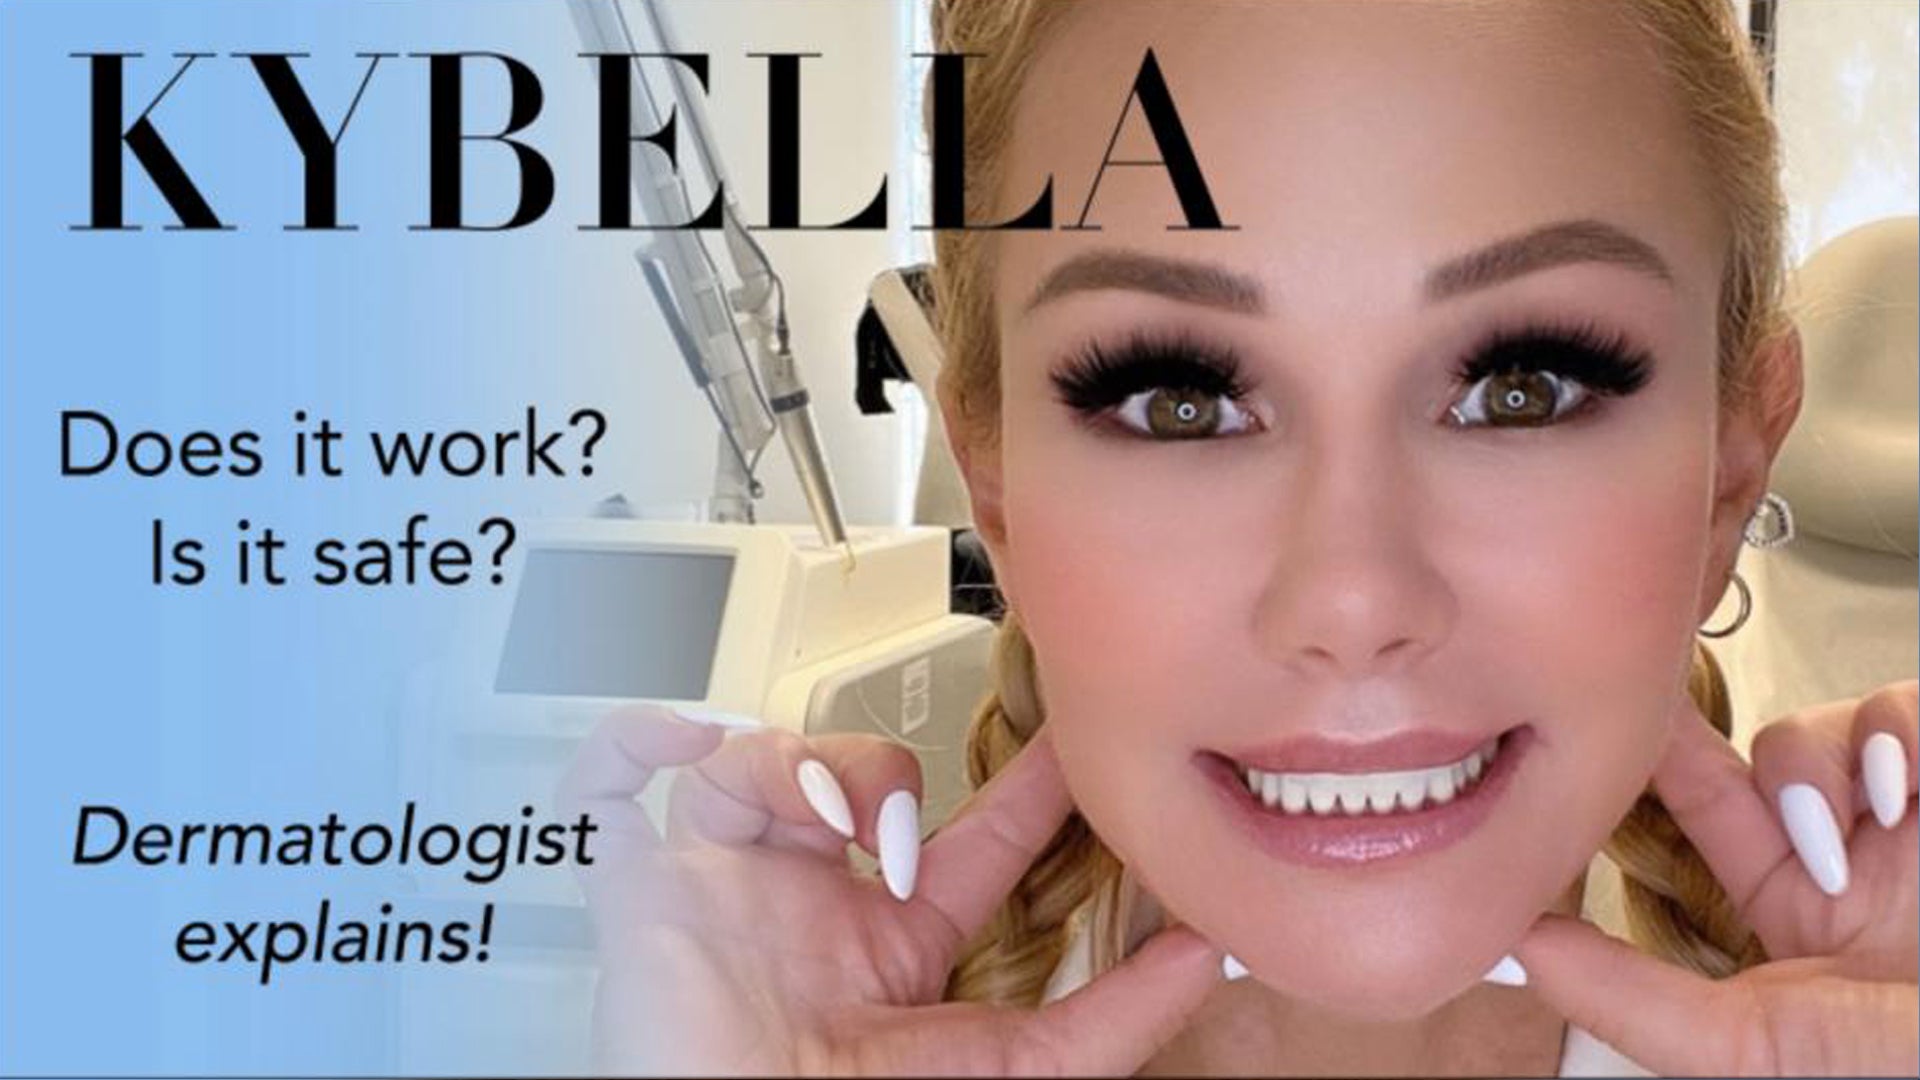 Looking for a tighter and more contoured jawline? Kybella might be for you!